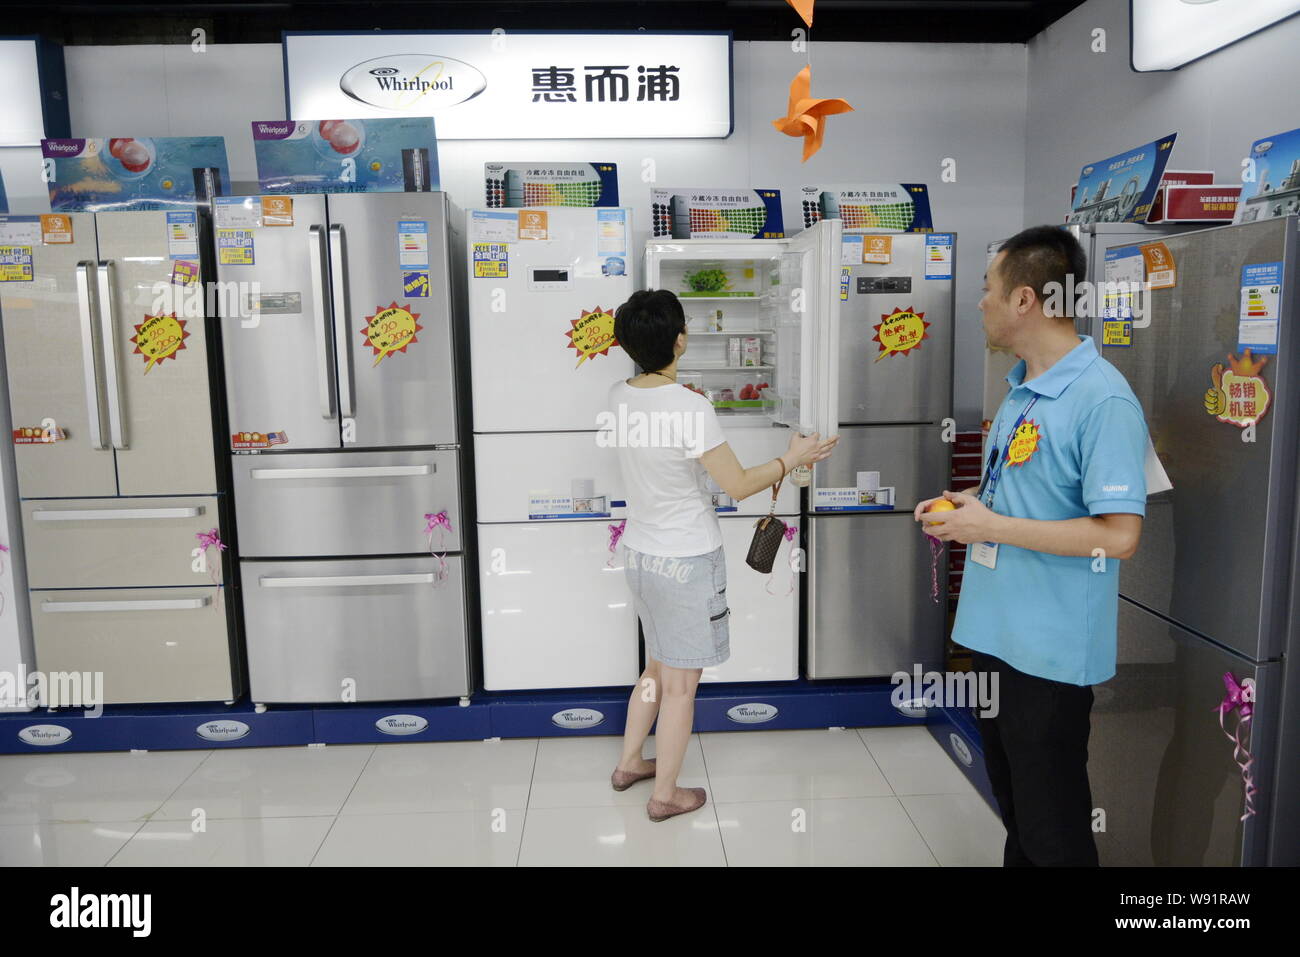 --FILE--A customer shops for a Whirlpool refrigerator at a home appliances store in Dalian city, northeast Chinas Liaoning province, 4 August 2013. Stock Photo